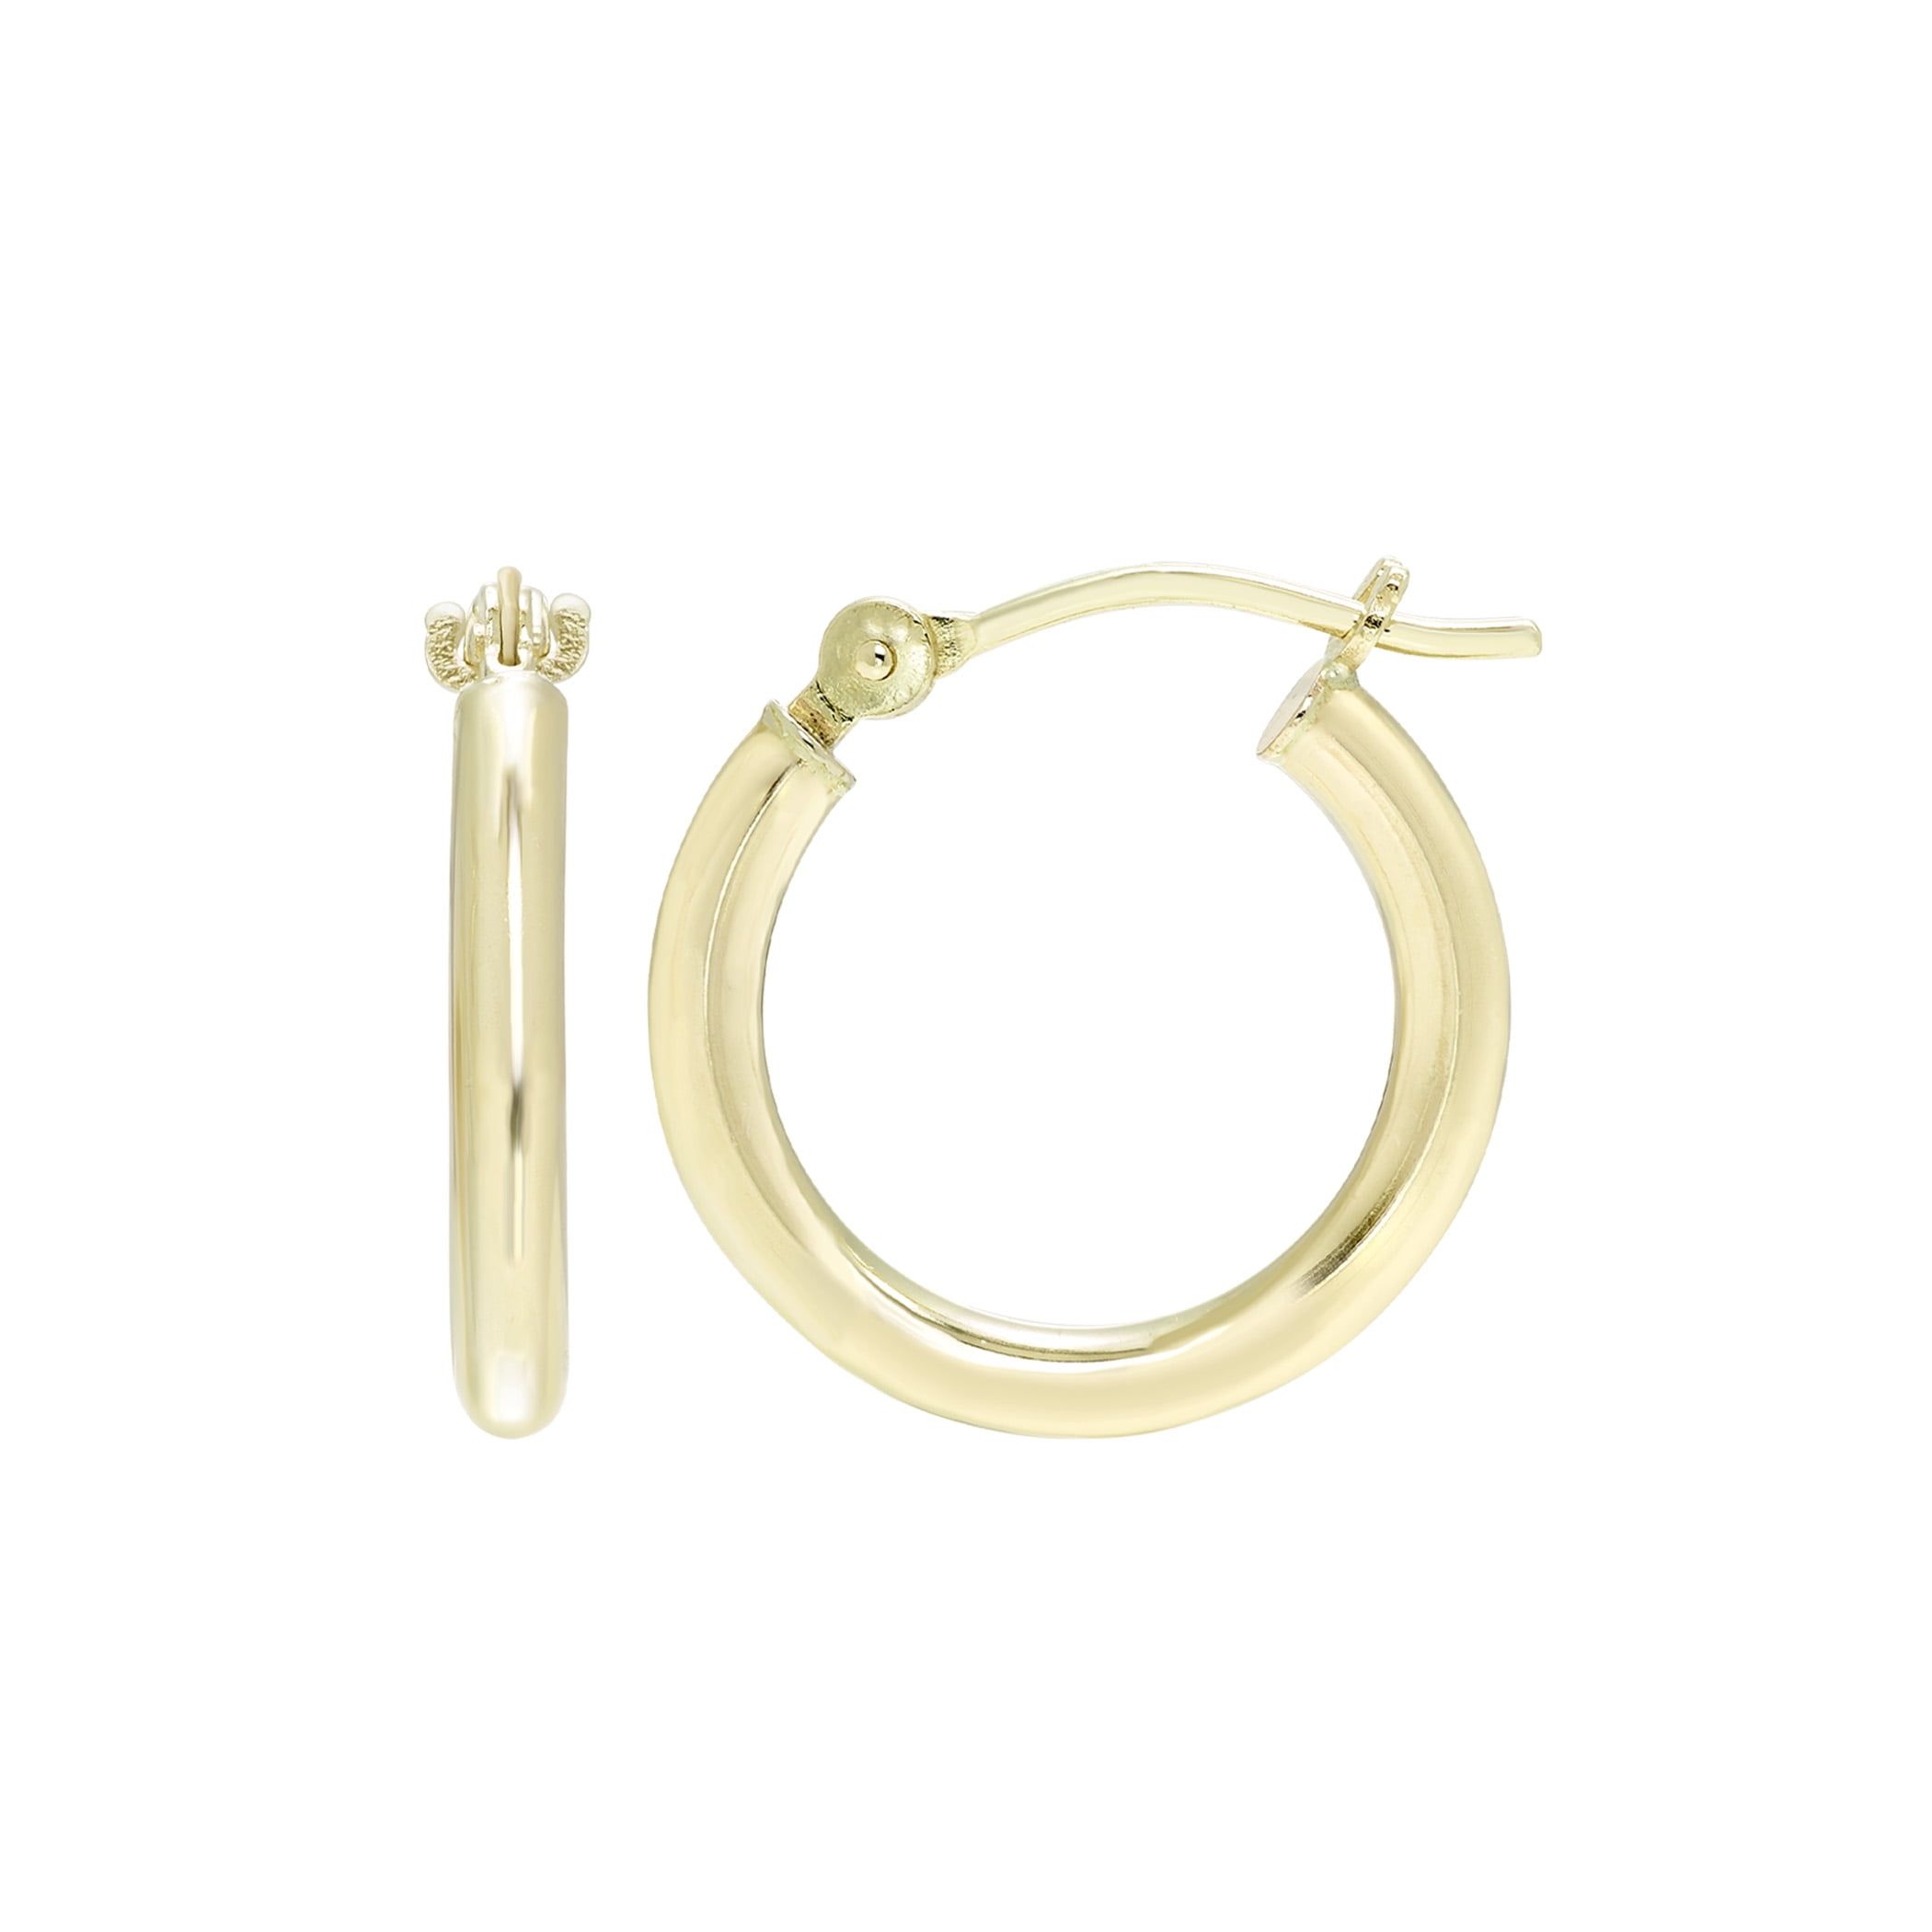 Mini and small gold hoops | Hoop earrings small, Huggies earrings, Chunky gold  hoop earrings